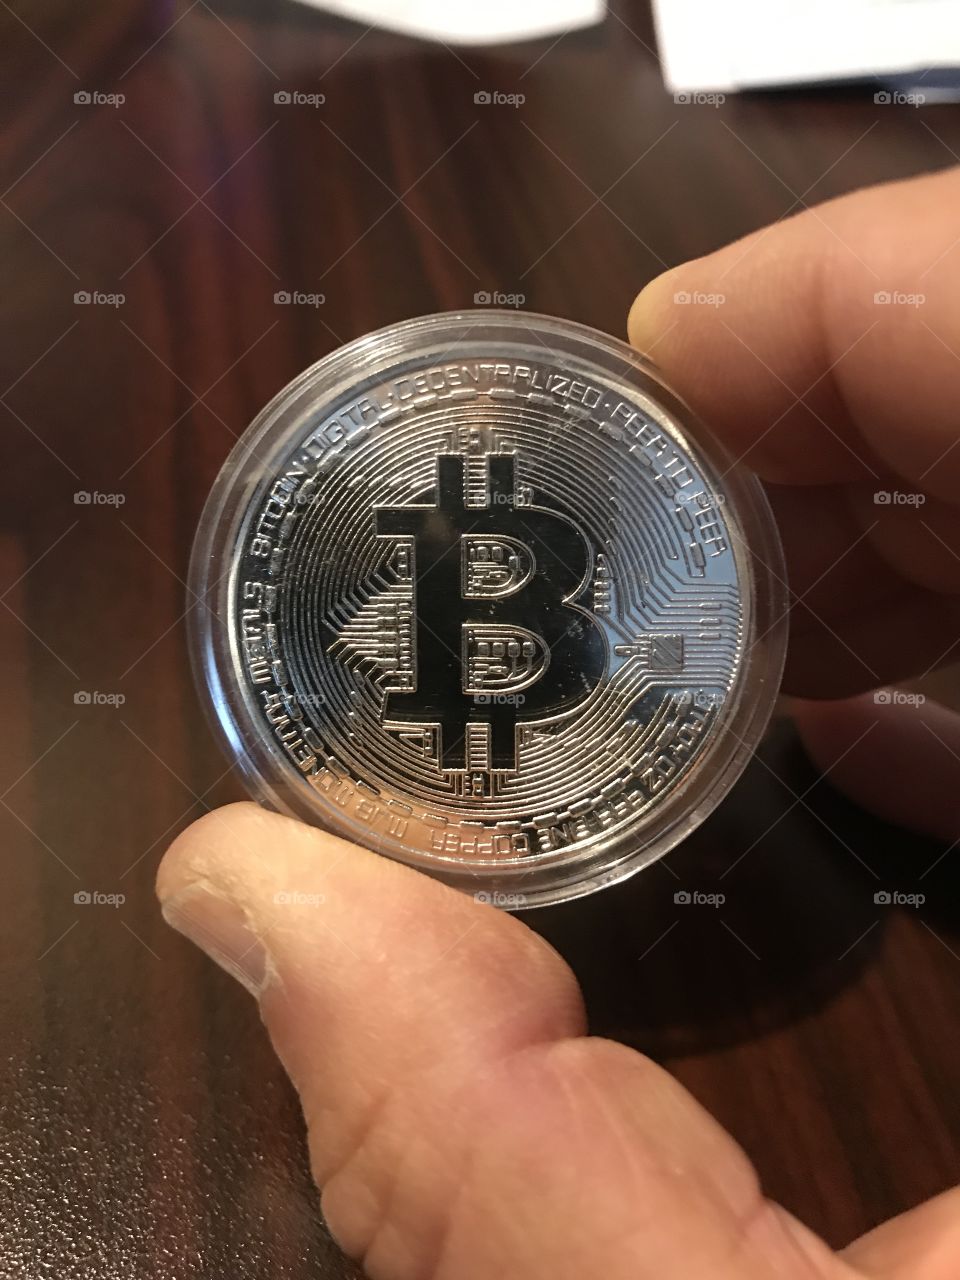 Fingers holding a shiny silver bitcoin 